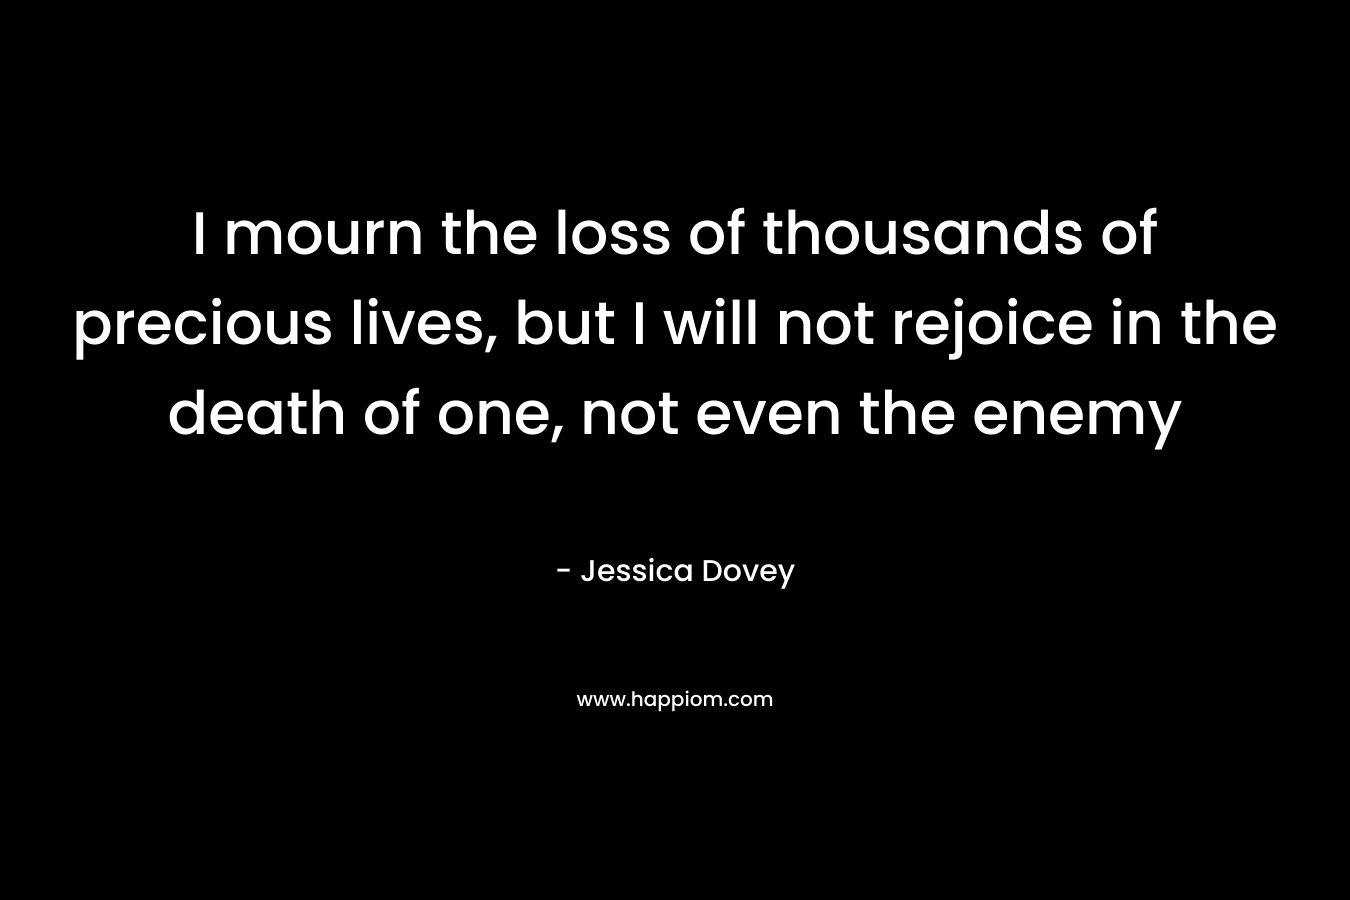 I mourn the loss of thousands of precious lives, but I will not rejoice in the death of one, not even the enemy